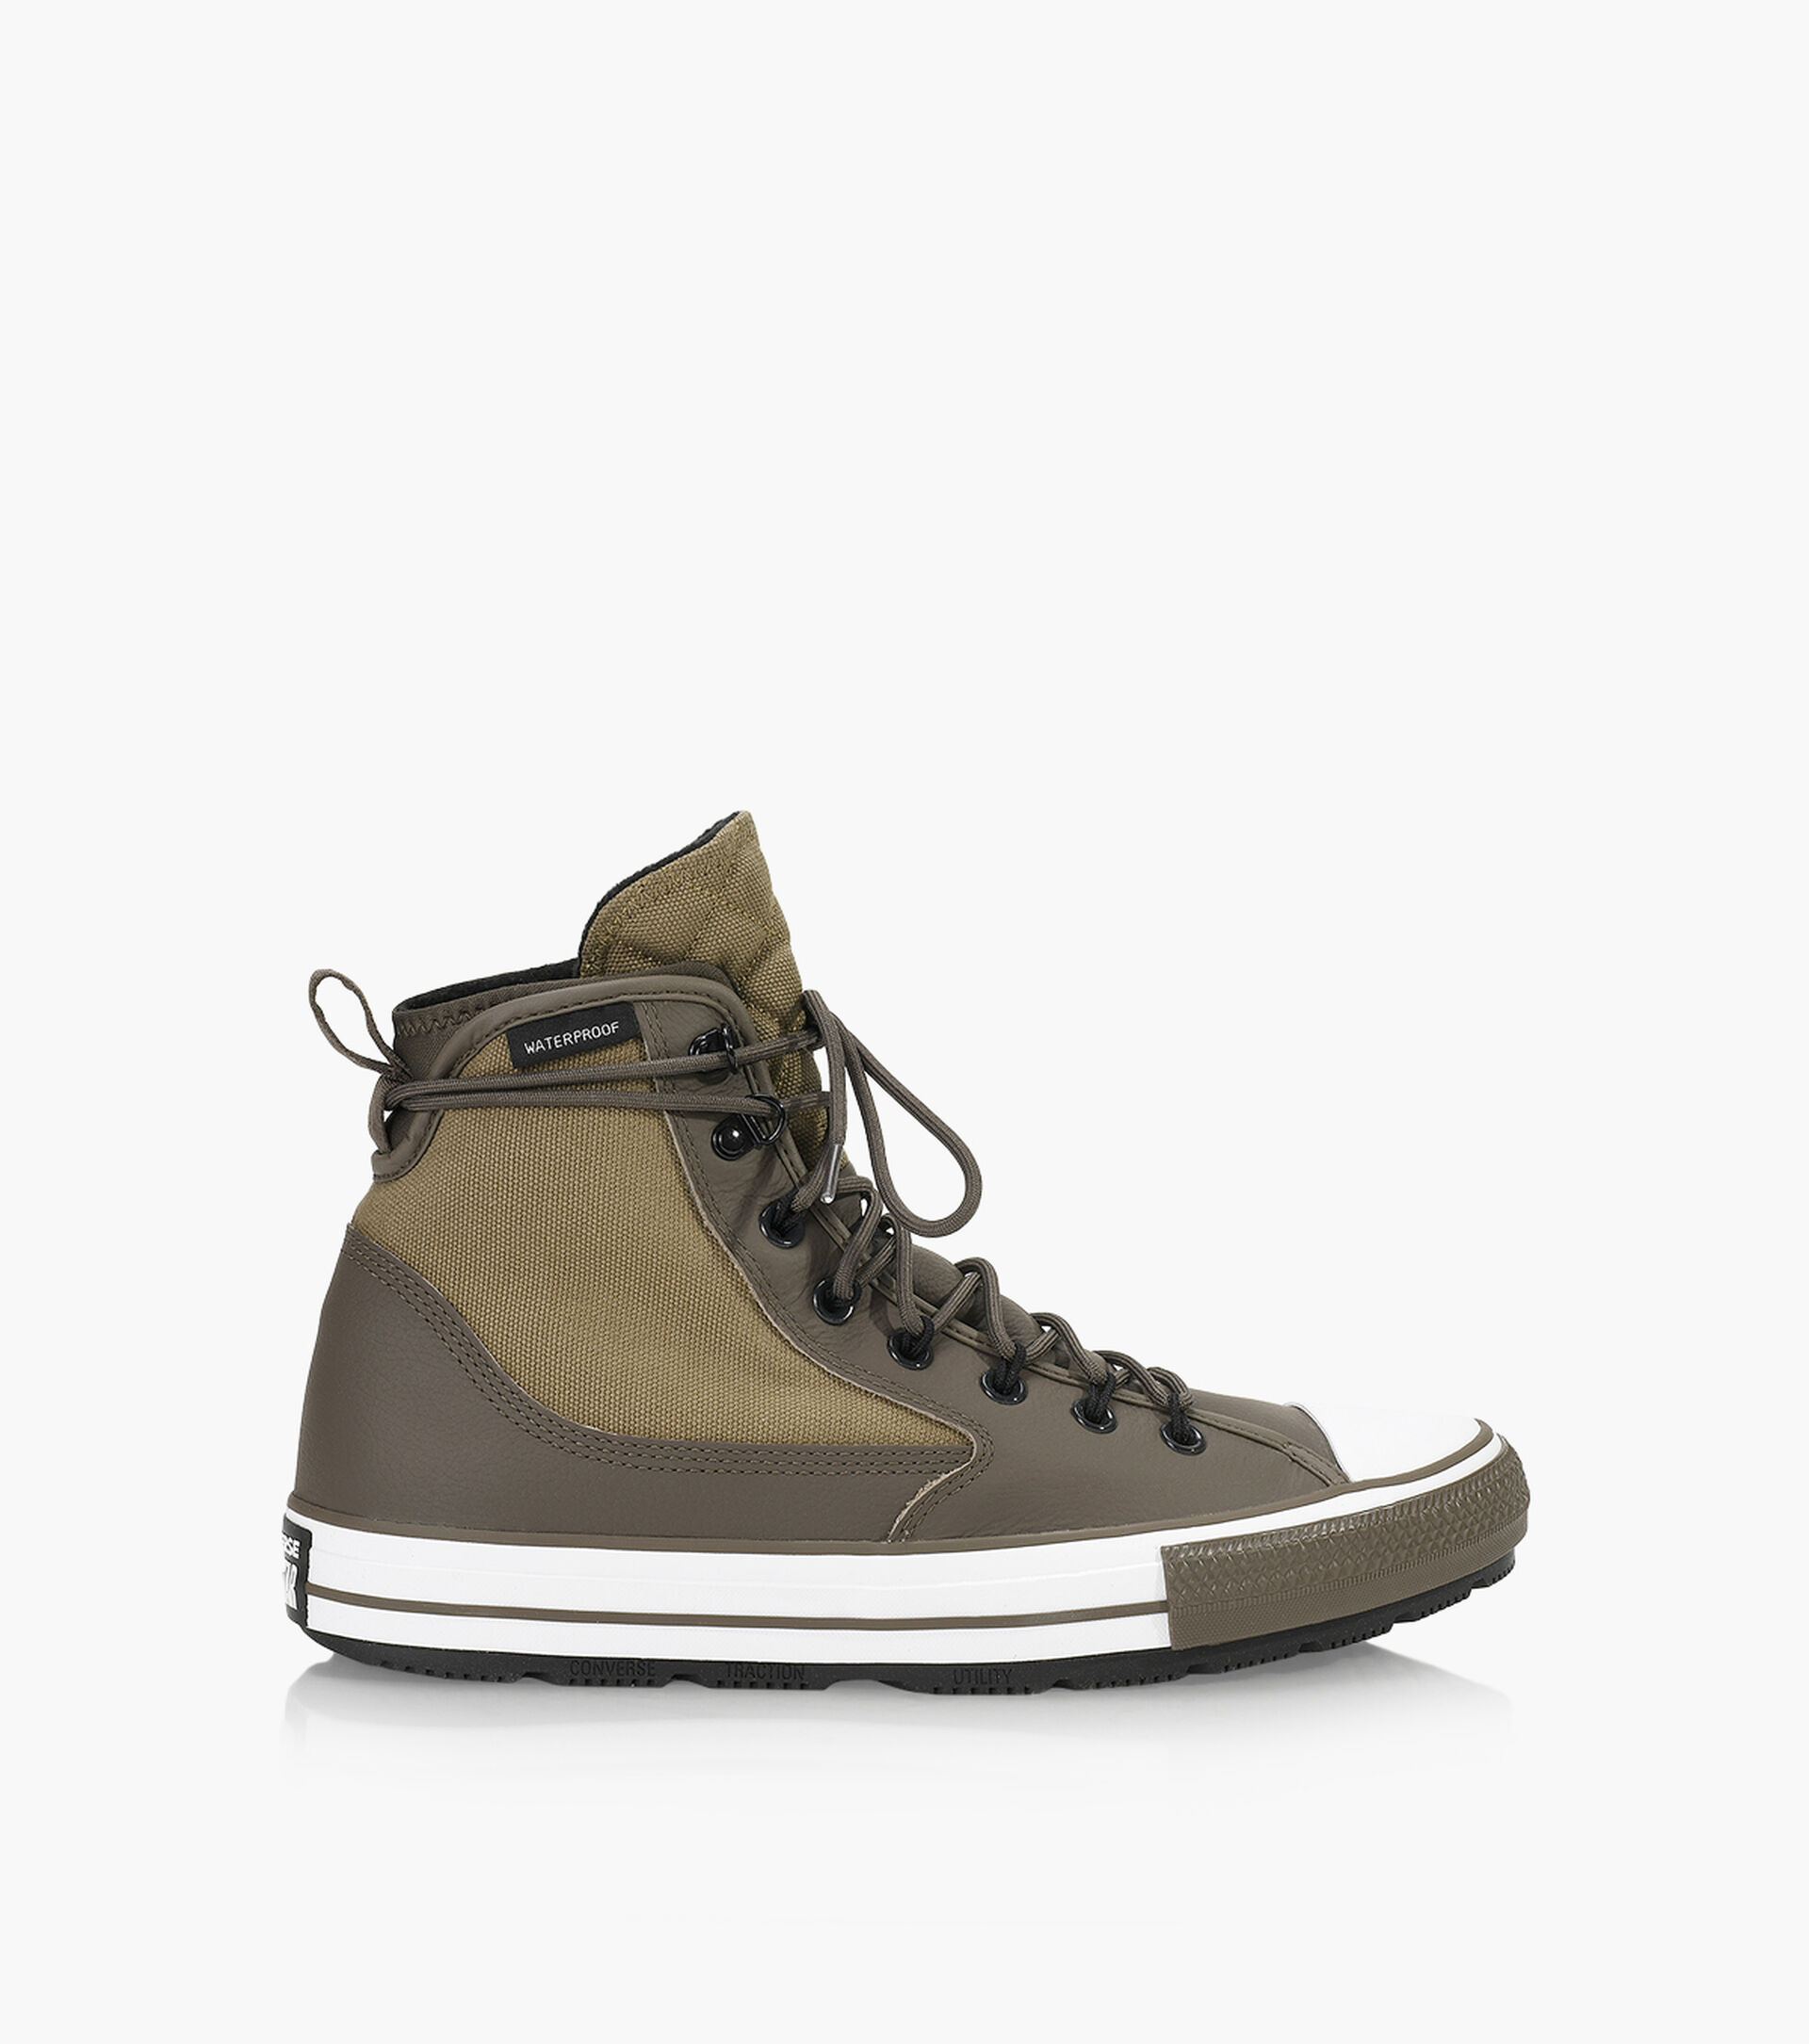 CONVERSE CHUCK TAYLOR ALL STAR UTILITY ALL TERRAIN BOOT - Leather ...